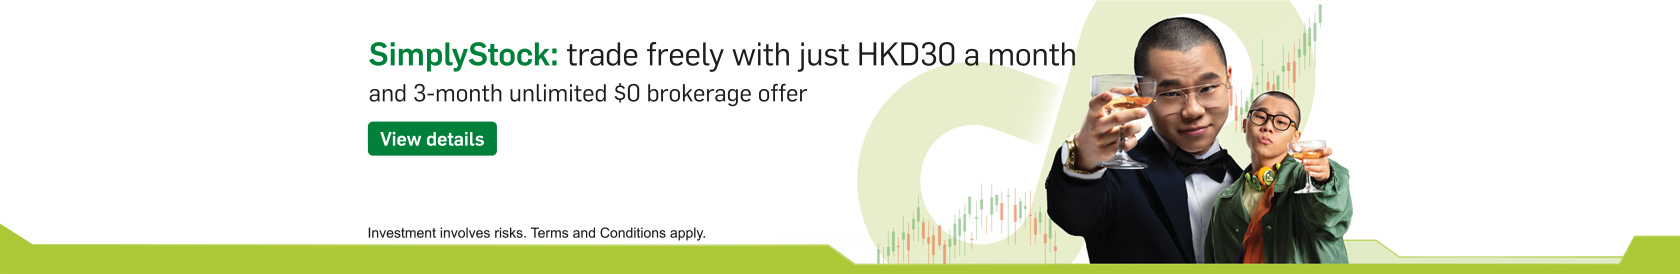 3-month unlimited $0 brokerage for stocks trading and up to HKD20,000 cash reward. View details. Opens in a new window